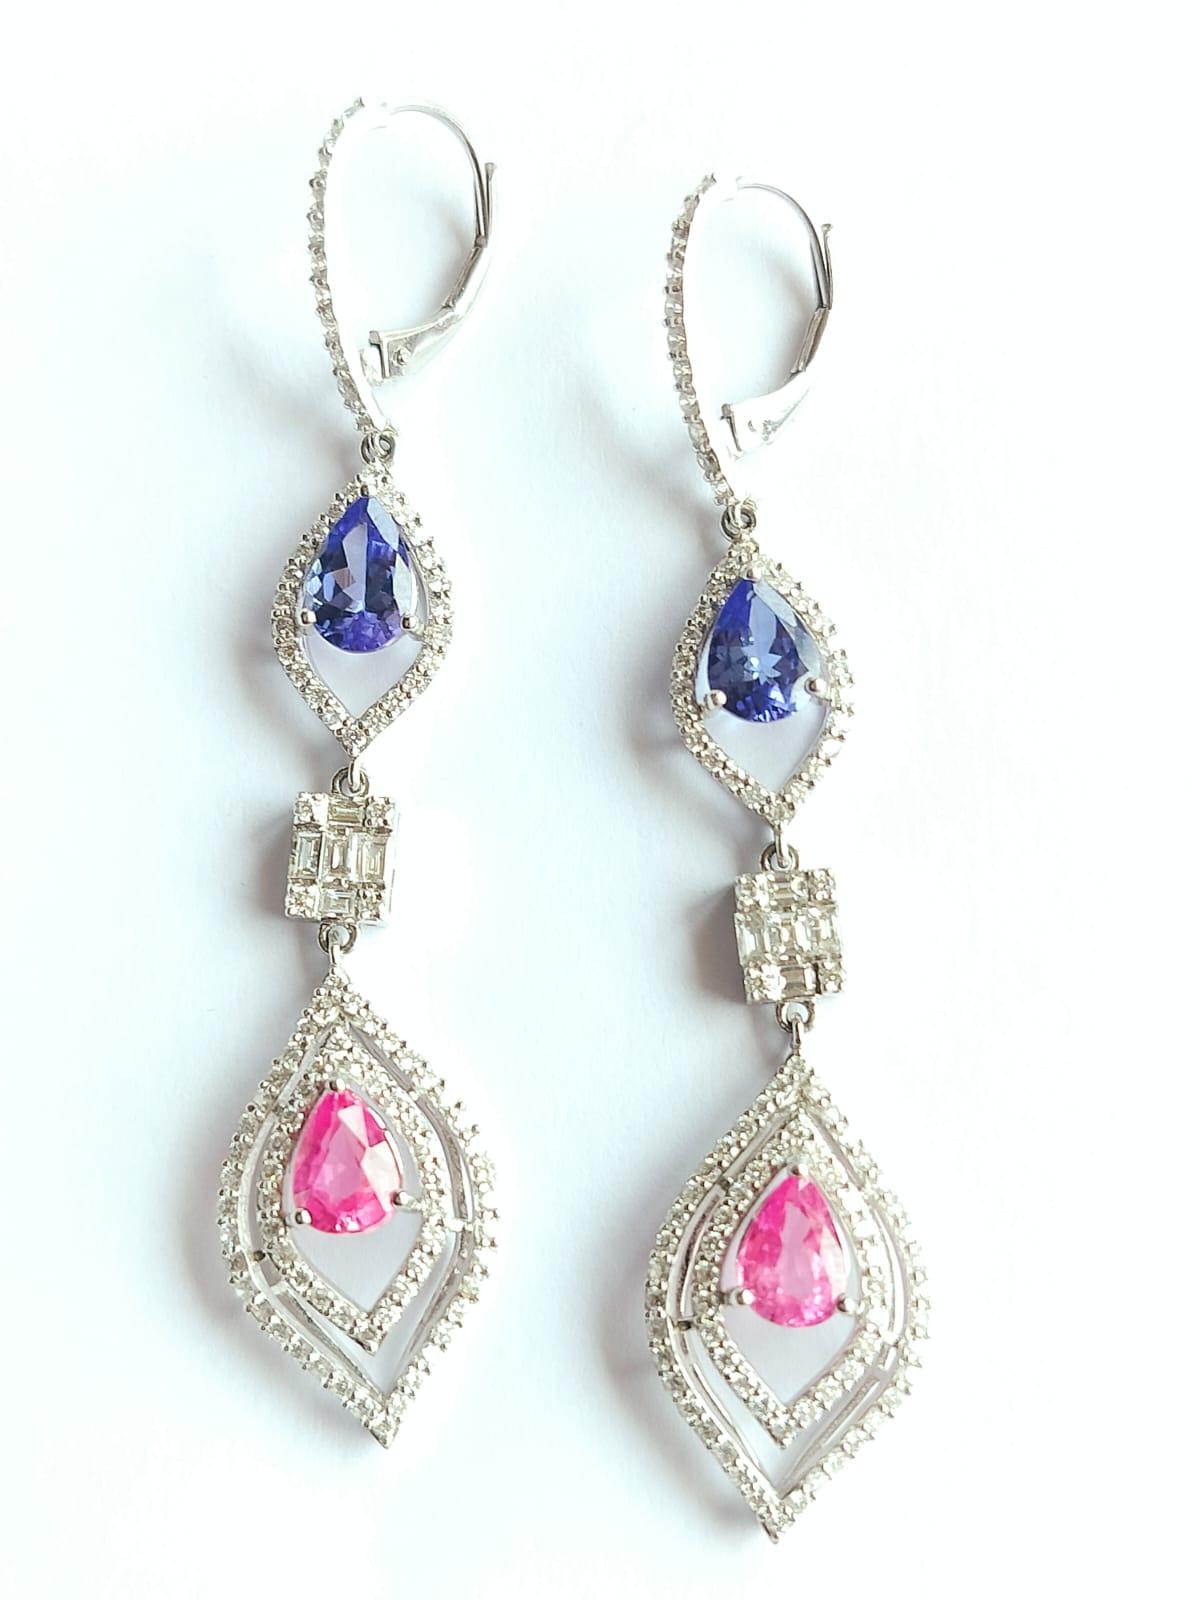 A very gorgeous and beautiful, Modern style Tanzanite Pink Sapphire Dangle Earrings set in 18K Gold. The weight of the Tanzanite is 1.69 carats. The Tanzanite is responsibly sourced from Tanzania. The weight of Pink Sapphire is 1.95 carats. The Pink